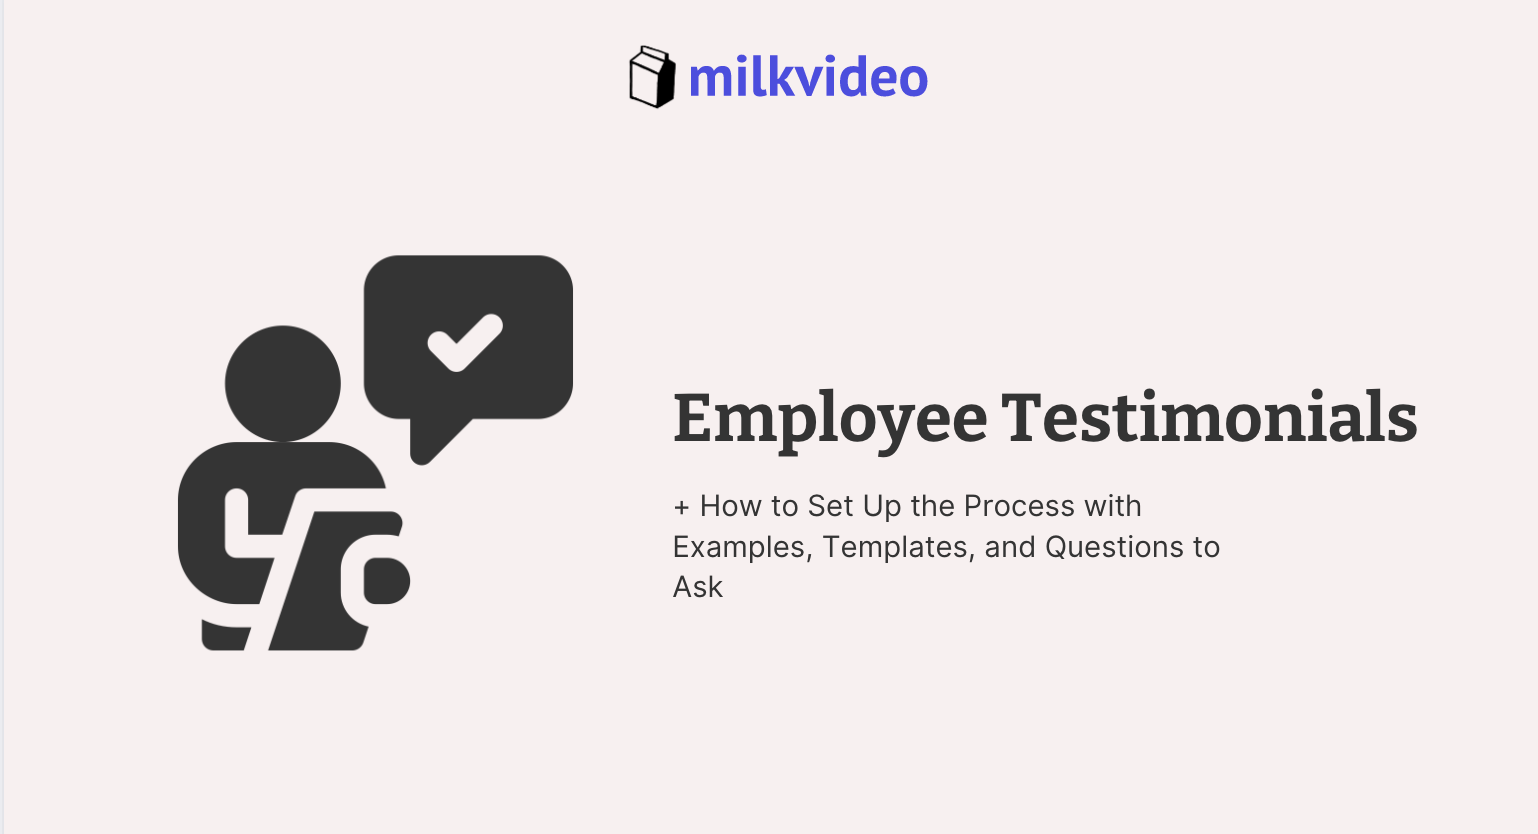 Employee Testimonials: How to Set Up the Process with Examples, Templates, and Questions to Ask